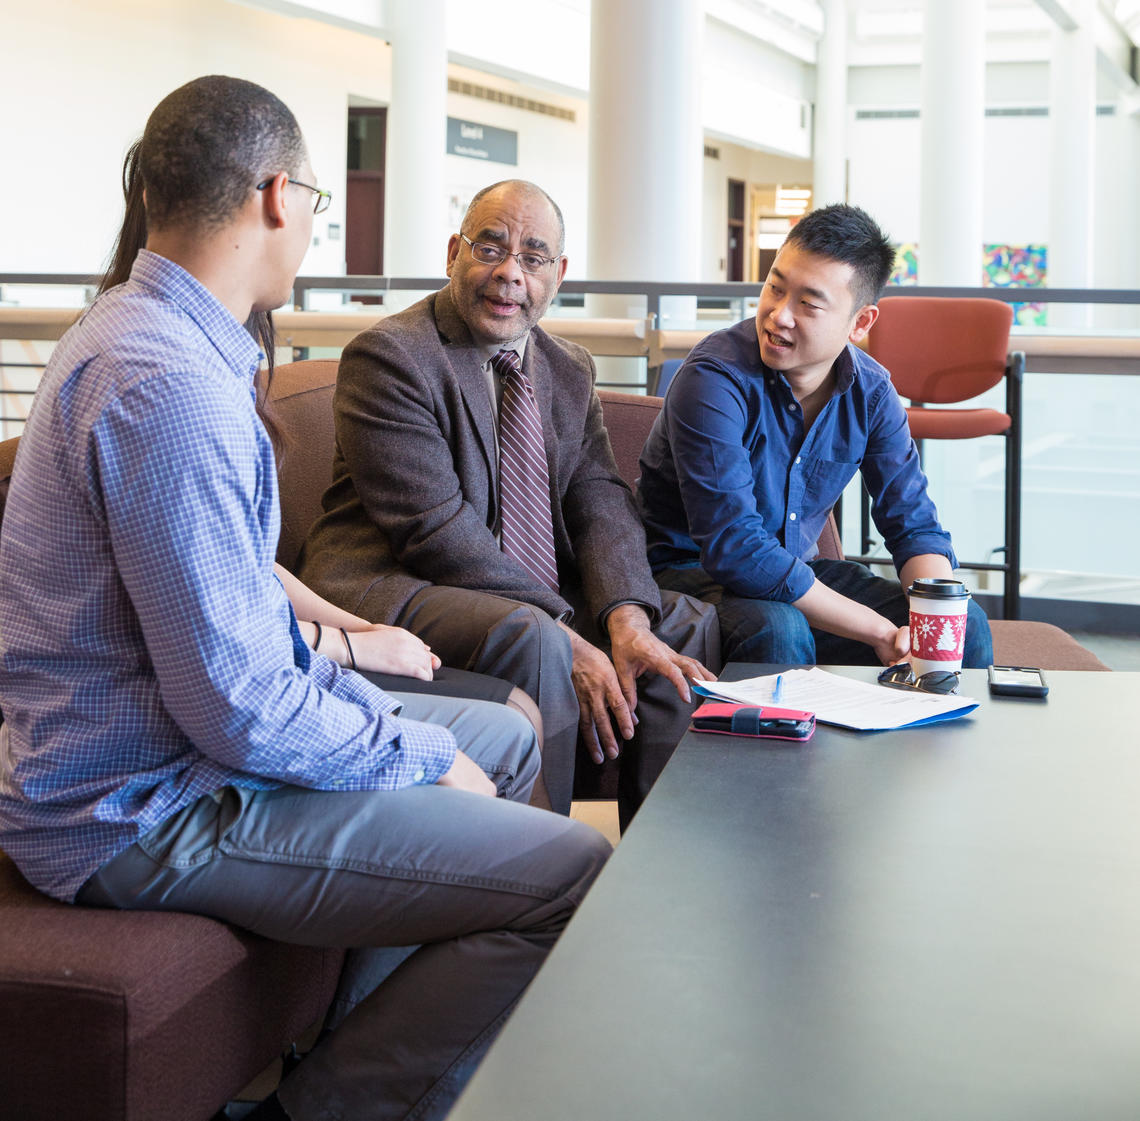  David Este, professor in the Faculty of Social Work at the University of Calgary, discusses a project with students in 2014. "This anniversary brought up a lot of memories for me," Este says. "There is a lot of African-Canadian history that many Canadians don’t know a lot about."